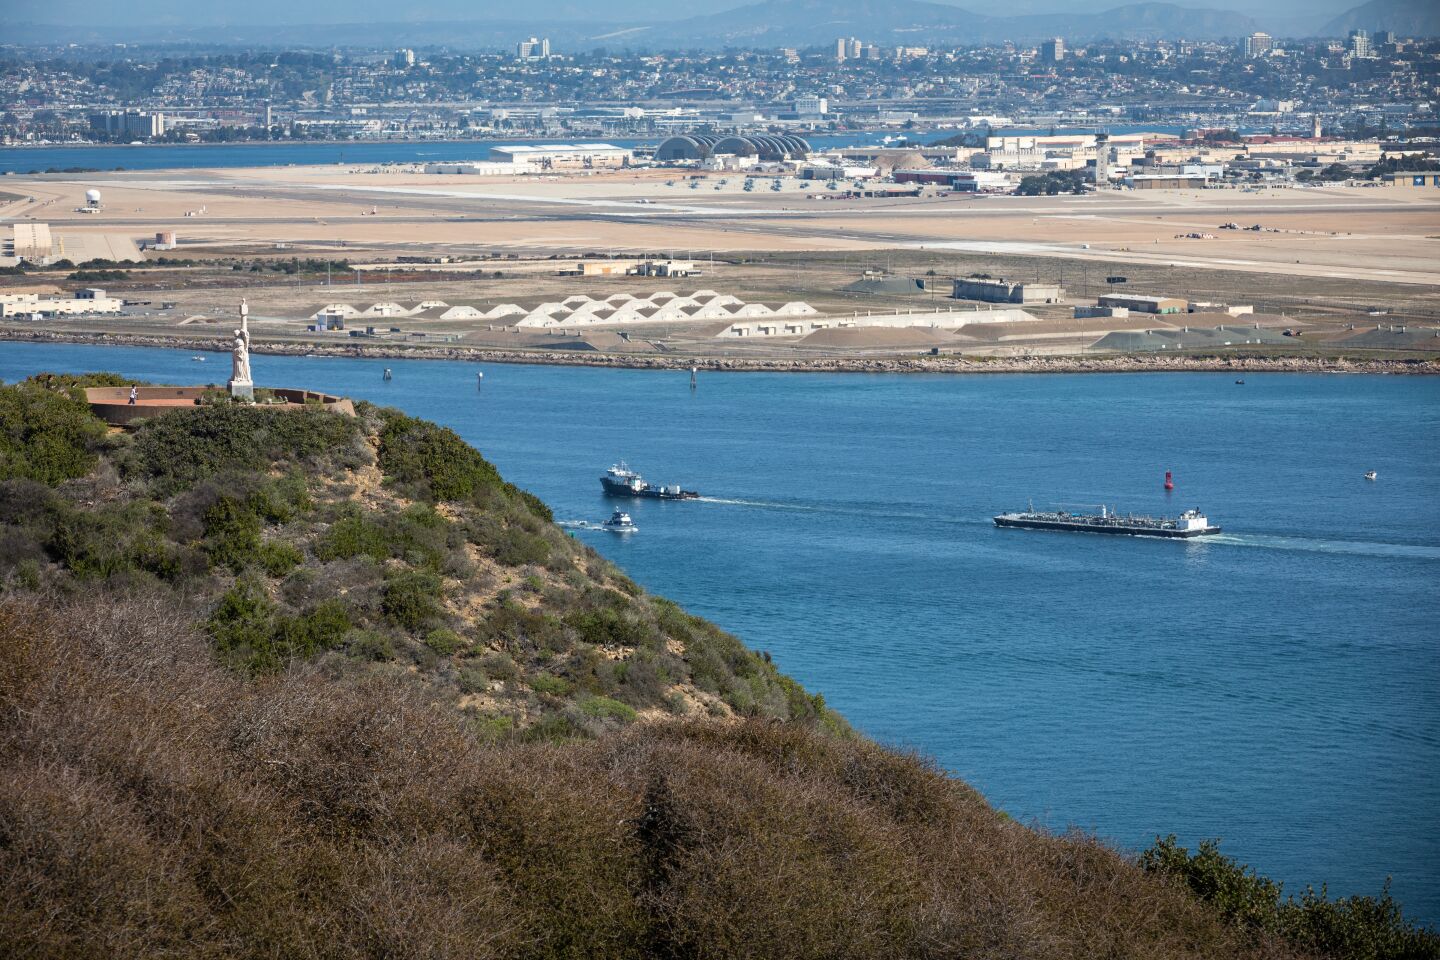 At left, the monument to explorer Juan Rodriguez Cabrillo, who in 1542 led the first European expedition that explored the west coast of what is now the United States, offers views across San Diego Bay.